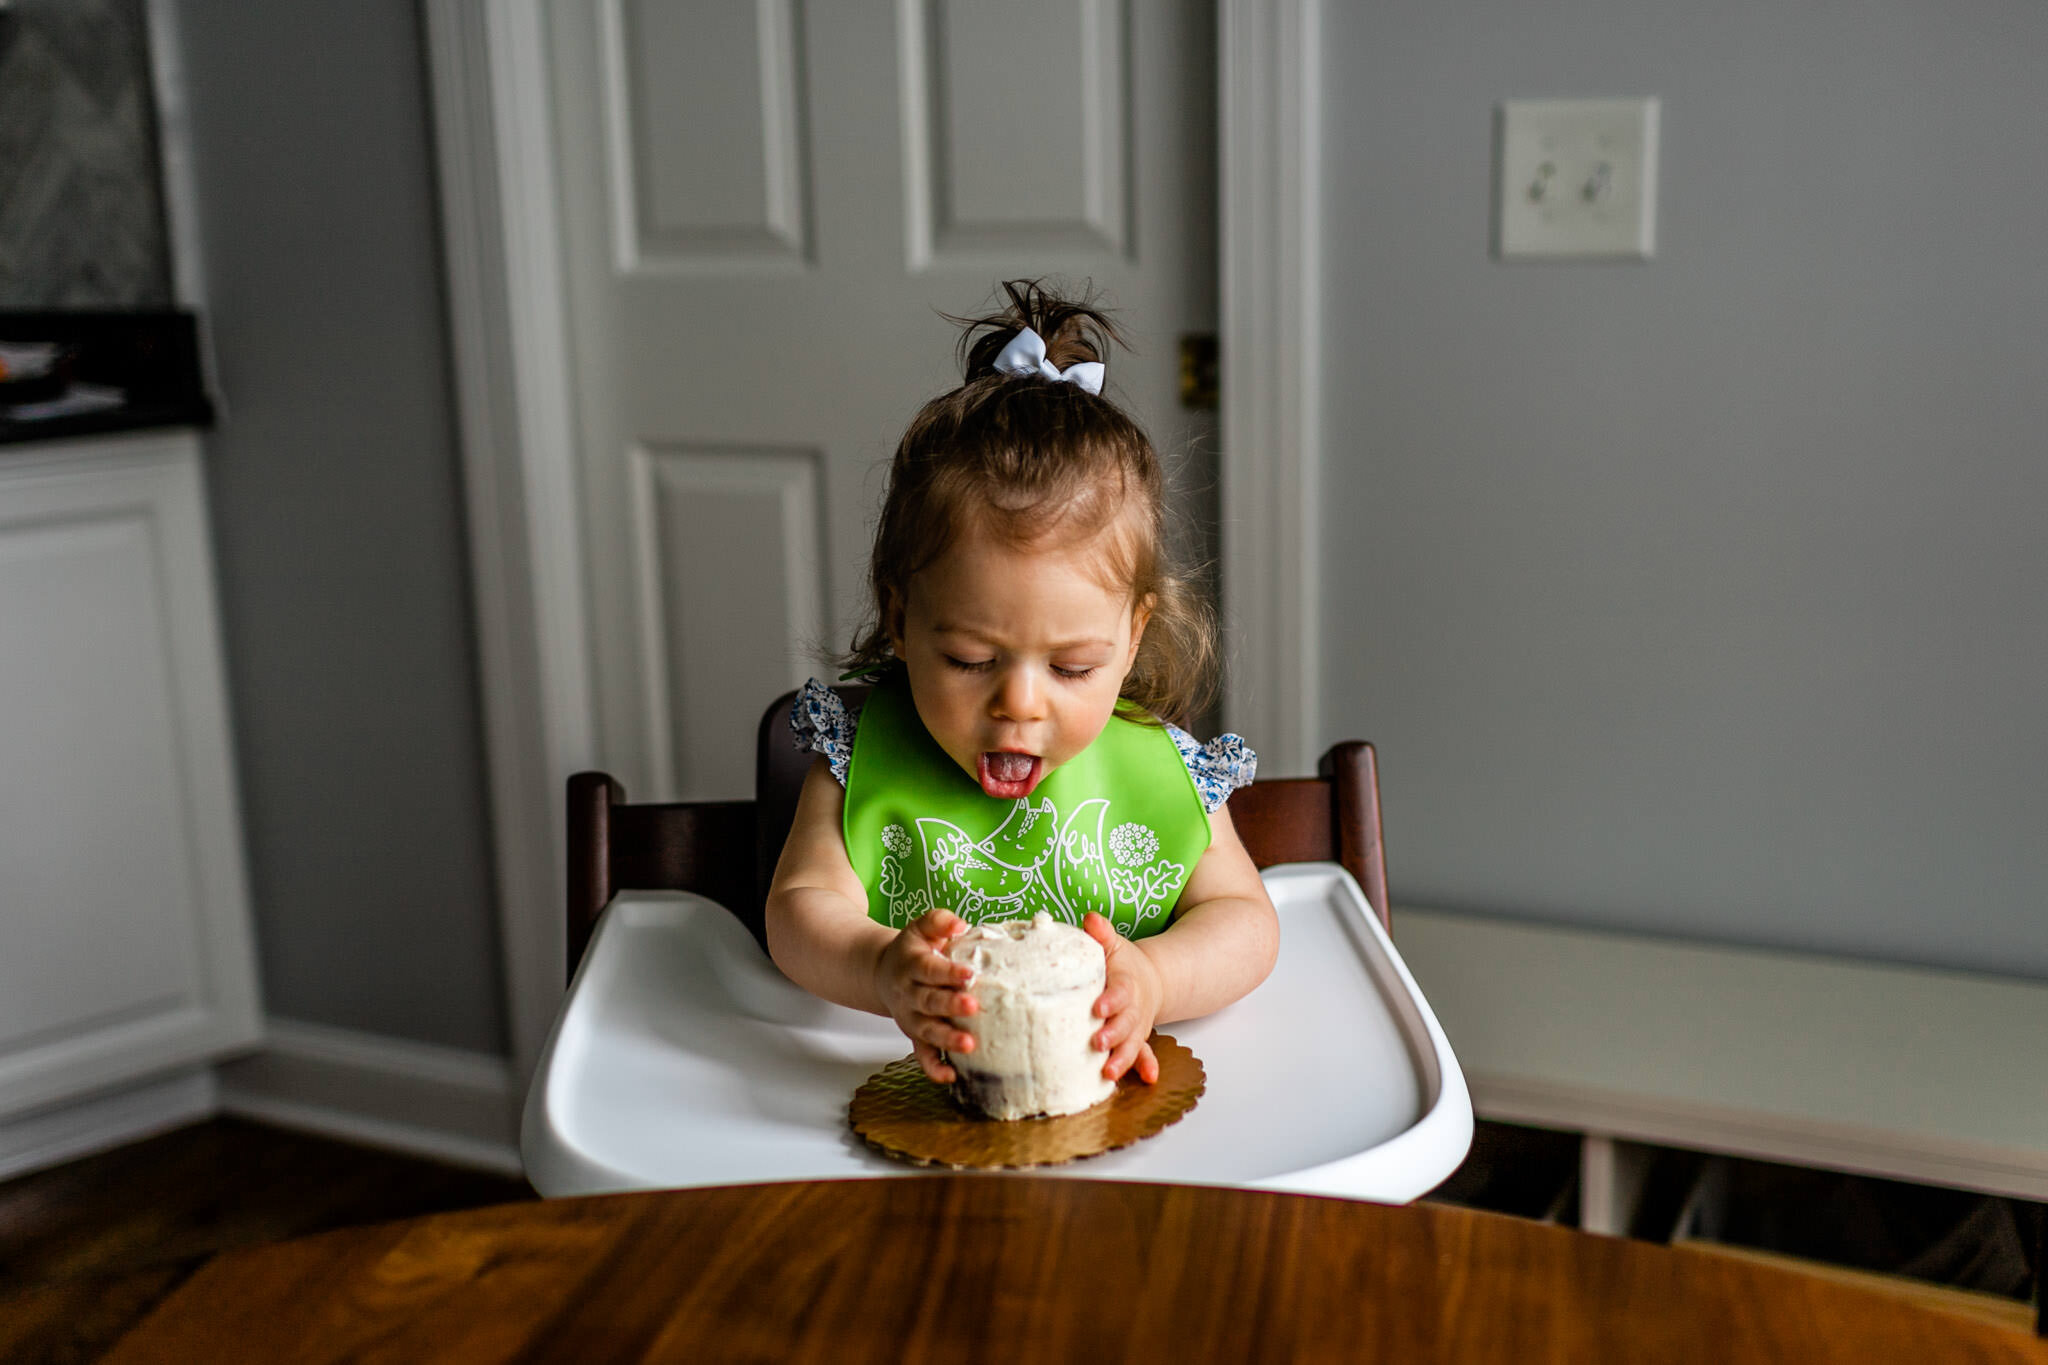 Durham Family Photographer | By G. Lin Photography | Baby girl grabbing cake